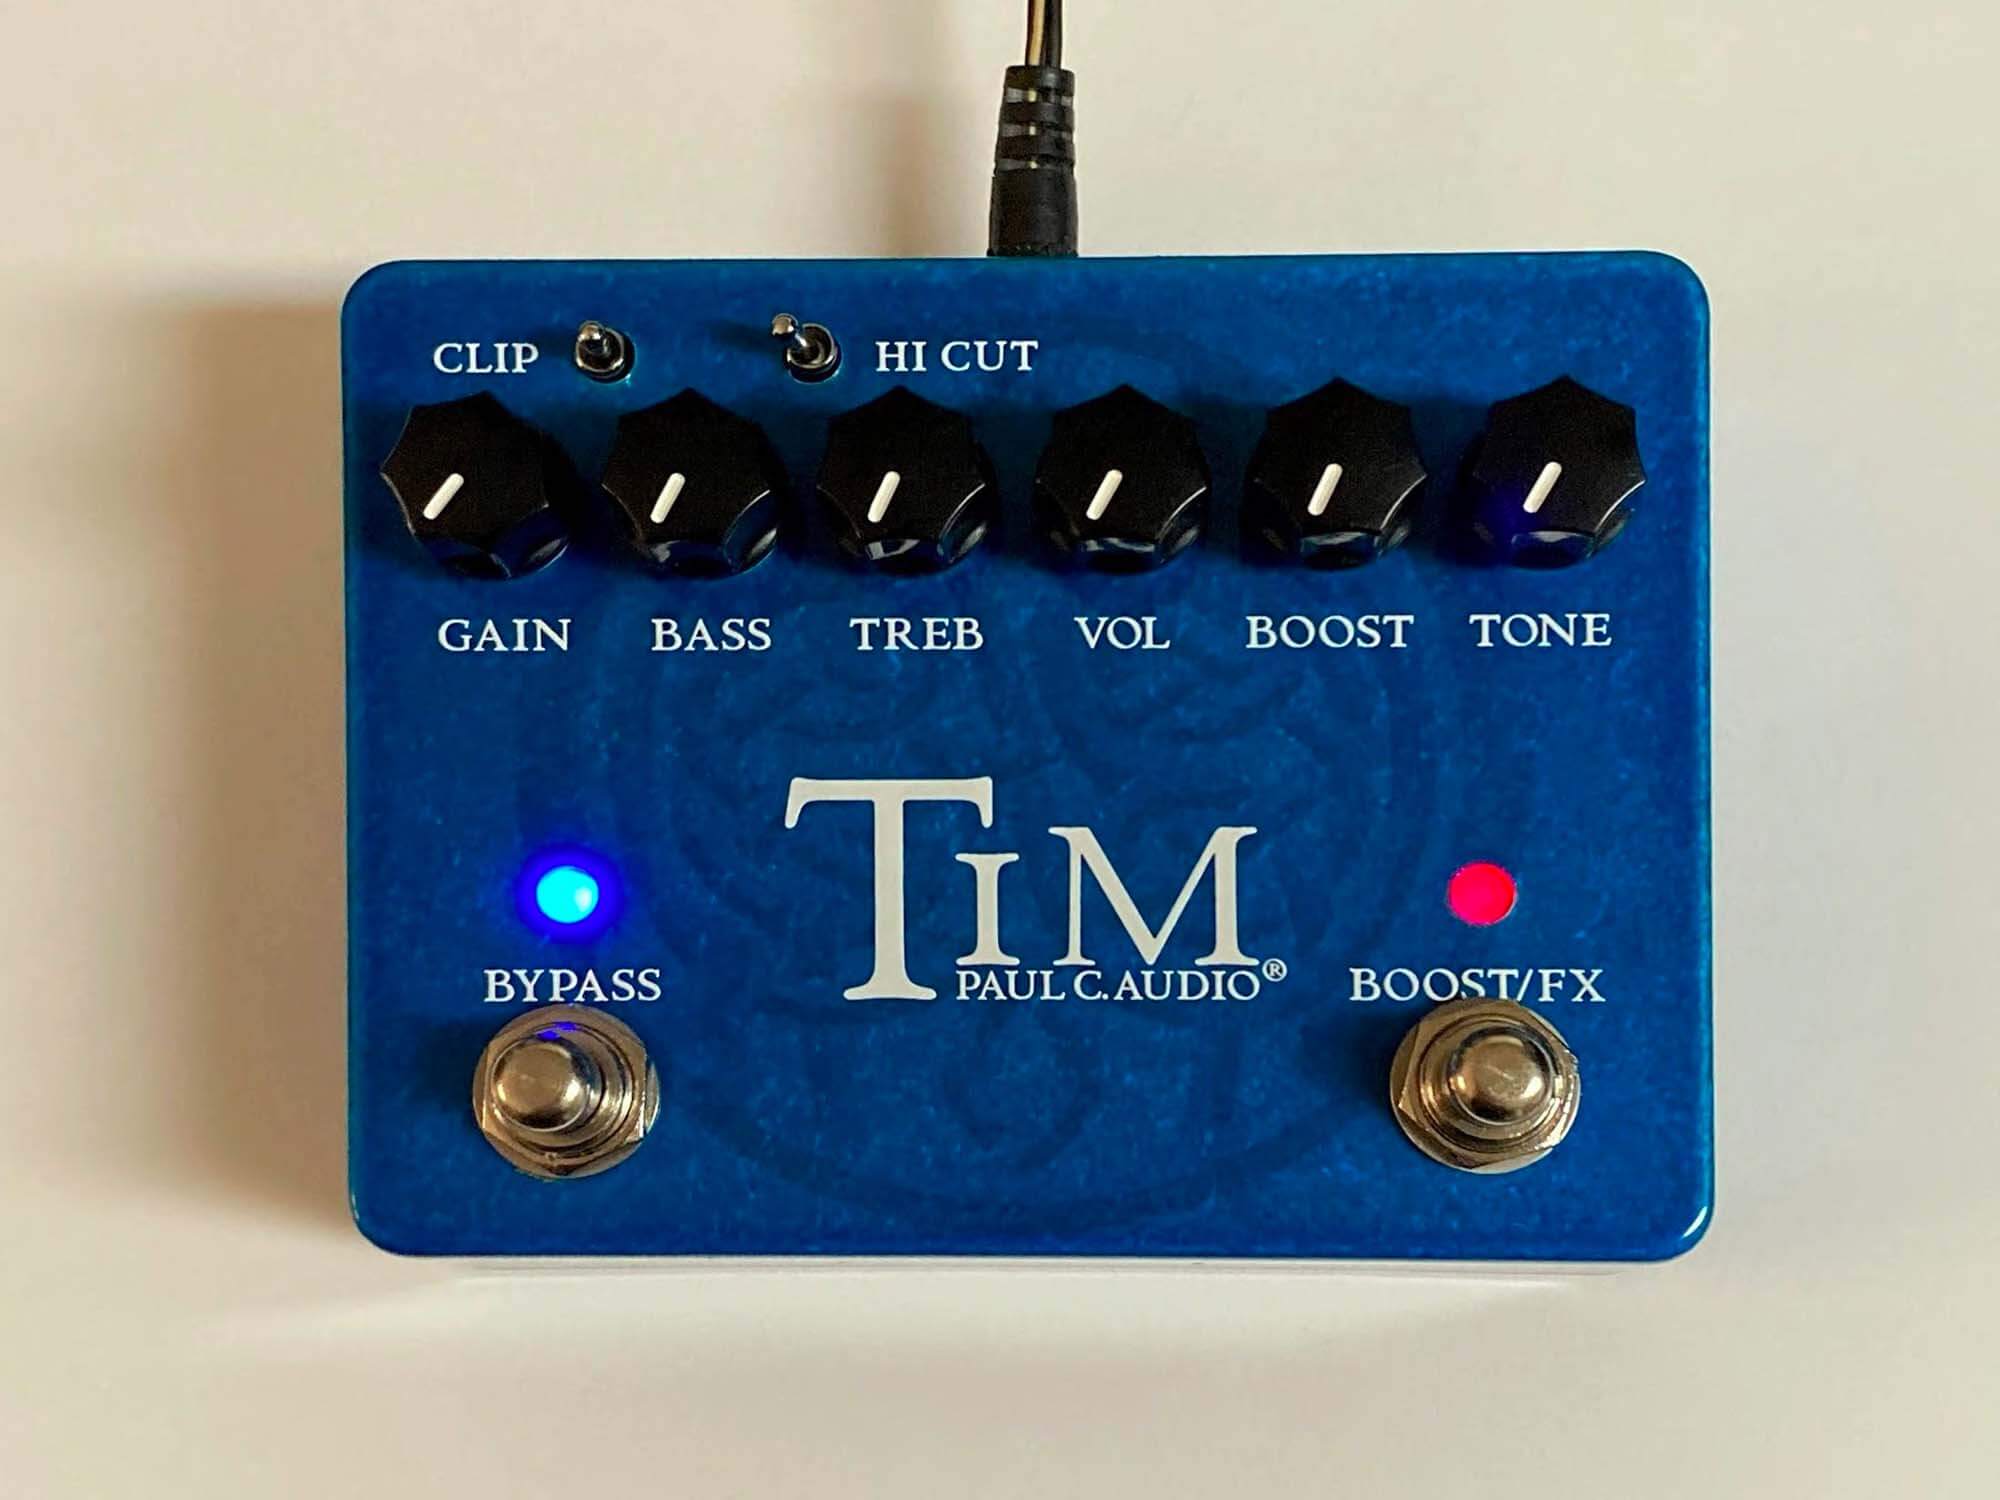 Surichinmoi Doorweekt dynastie Paul Cochrane teases a new Tim overdrive: “With luck I'm hoping it'll be  ready by the end of winter”